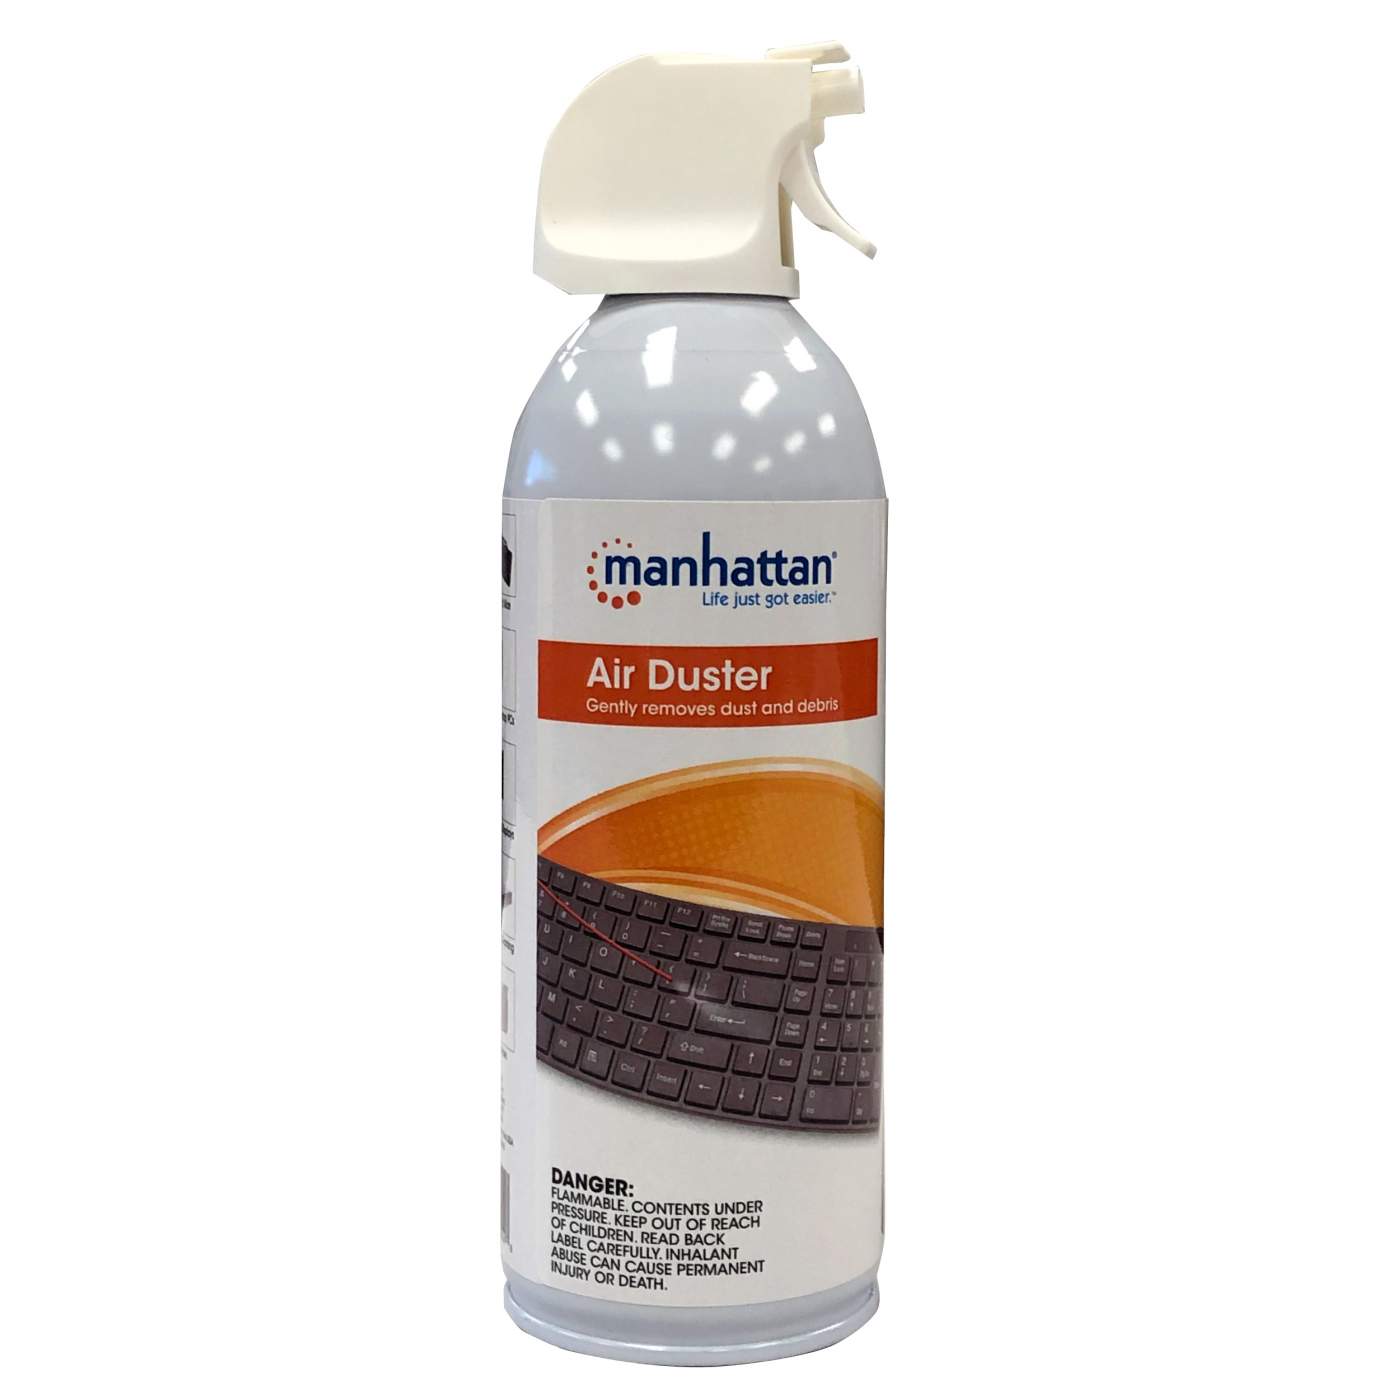 Air Duster Image 1